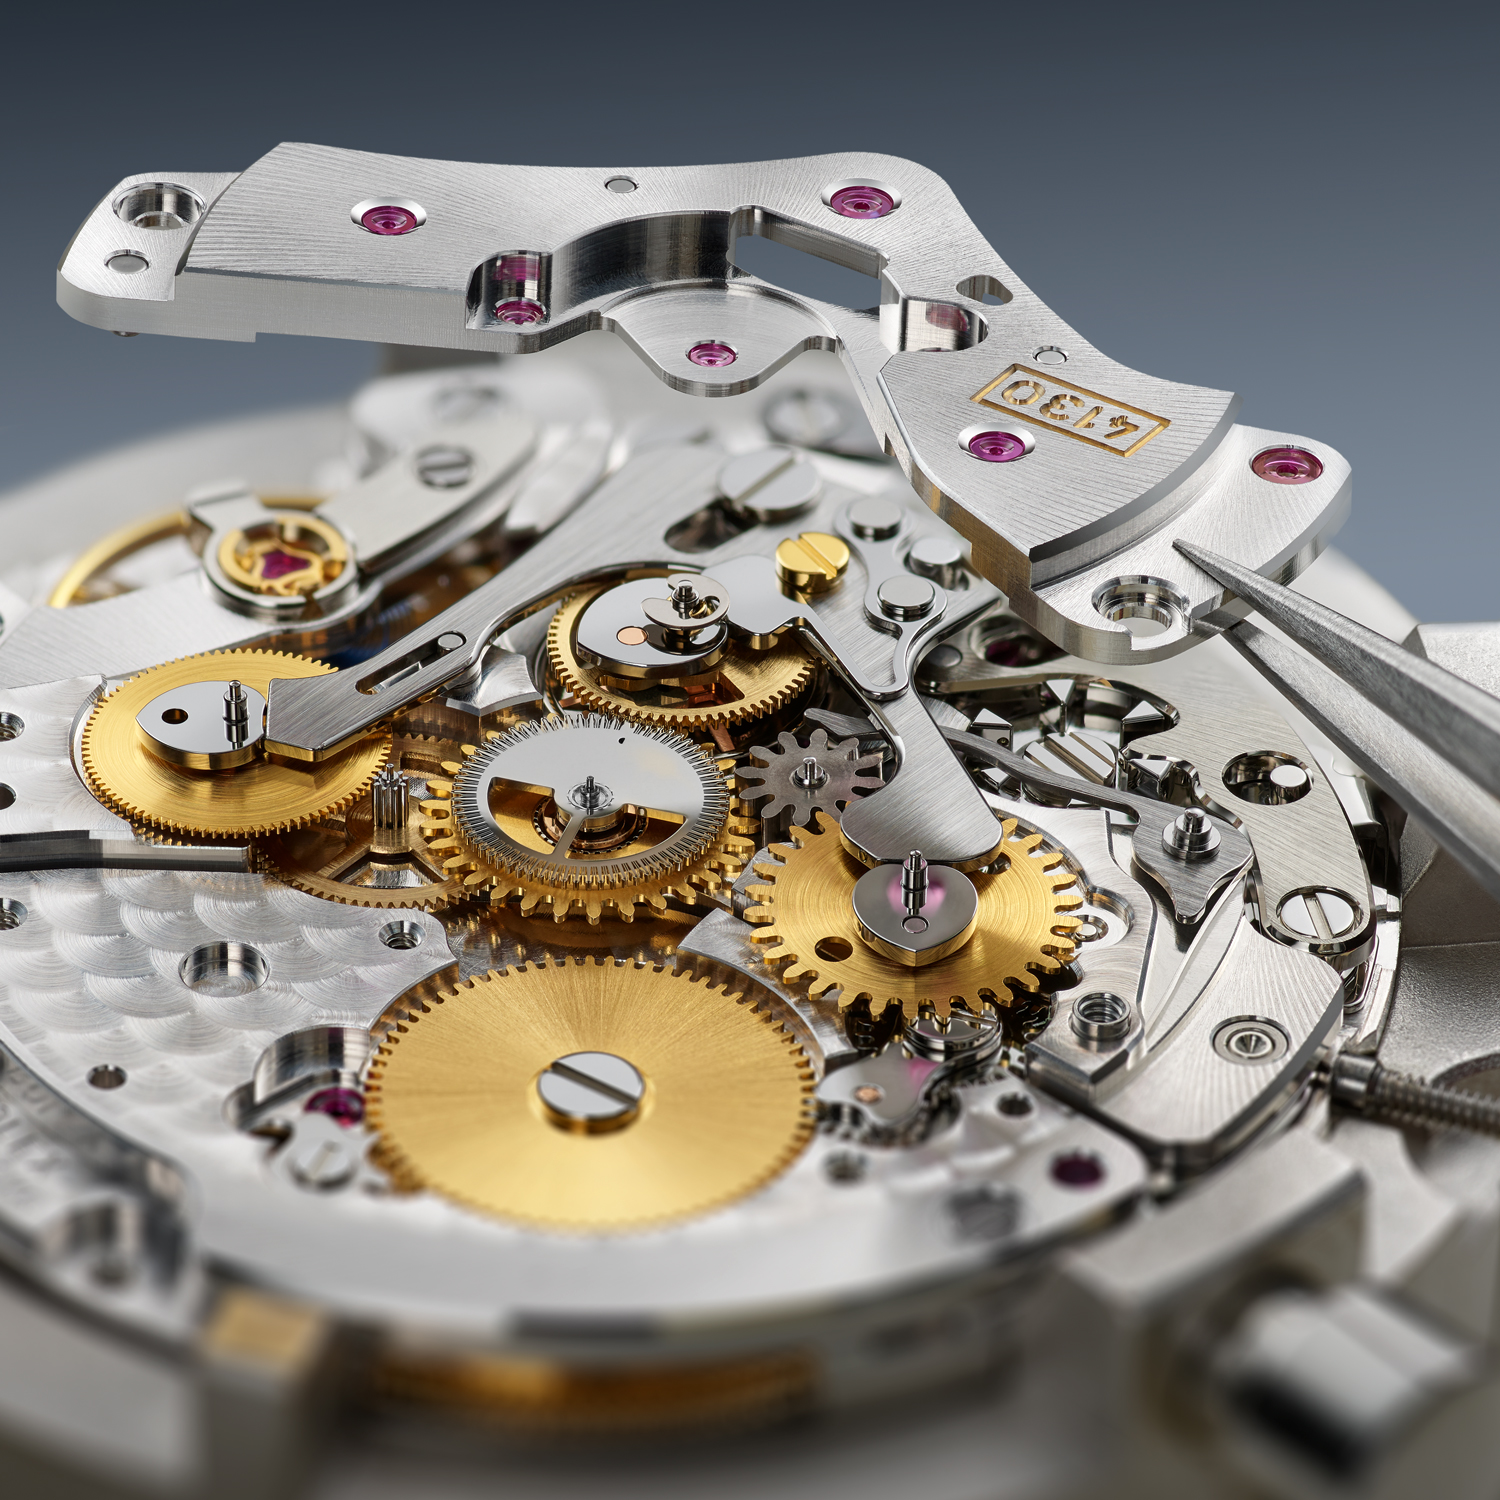 The chronograph wheel train of the caliber 4130. The three wheels placed neatly in a row from L-R: hour counting wheel, chronograph seconds wheel and minute counting wheel. It is the specific positioning of these wheels that gives the subdials room to breathe on the dial. (Image: Rolex)